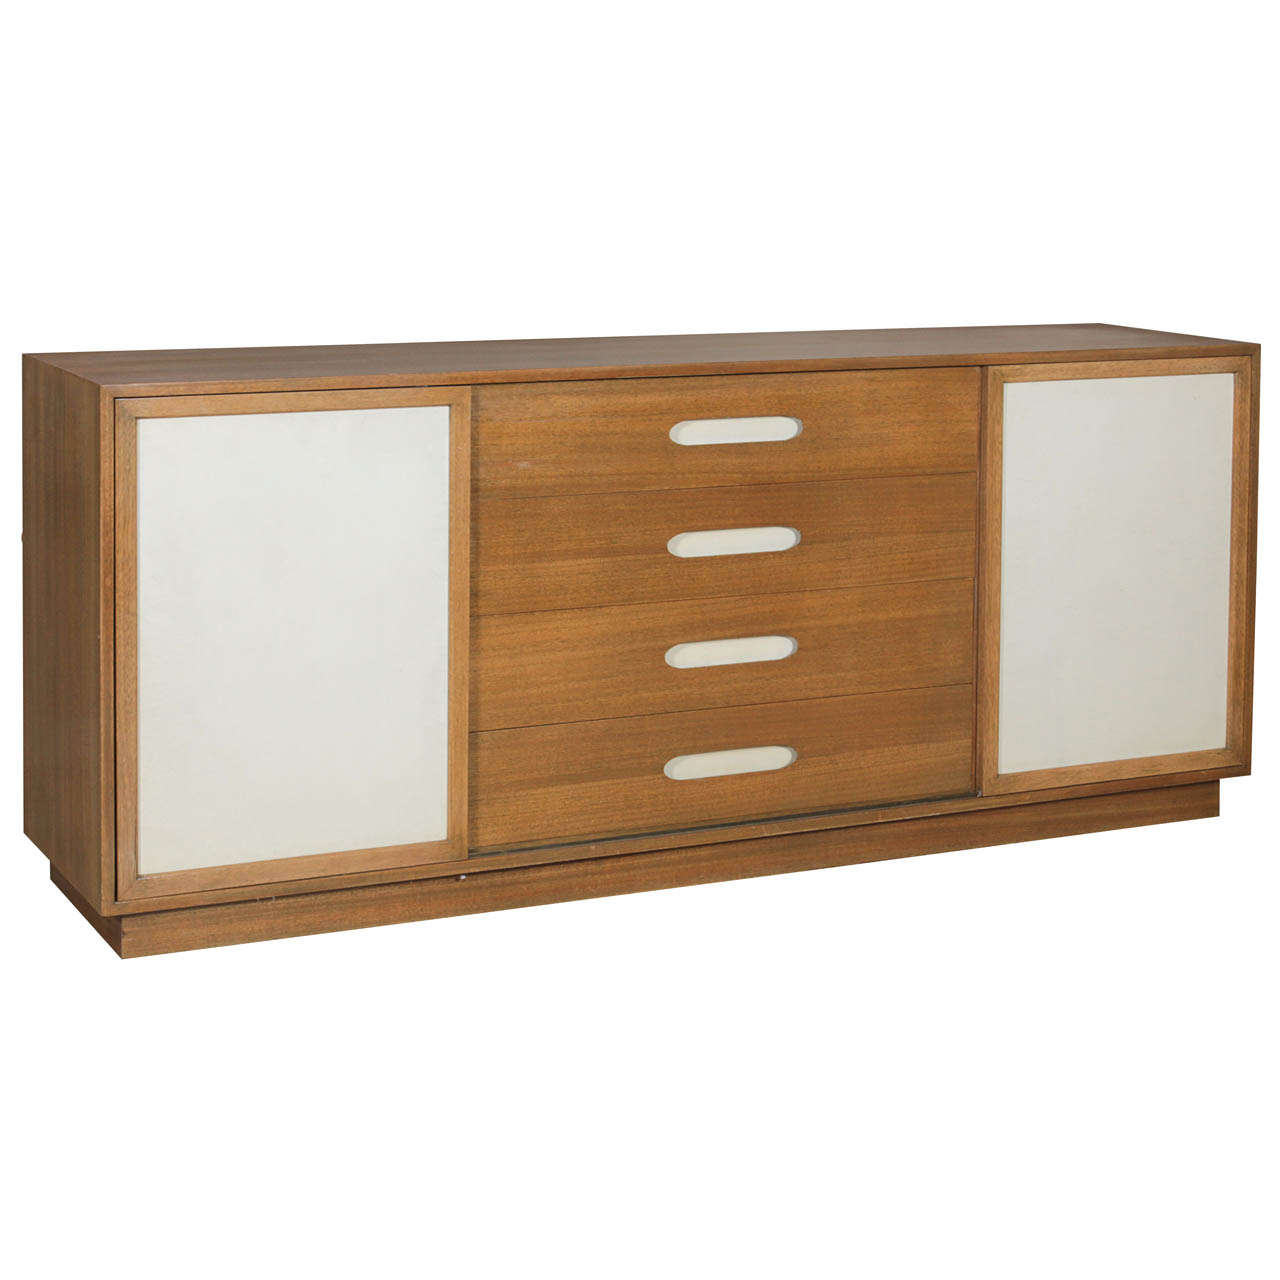 Mahogany and Leather Sideboard by Harvey Probber